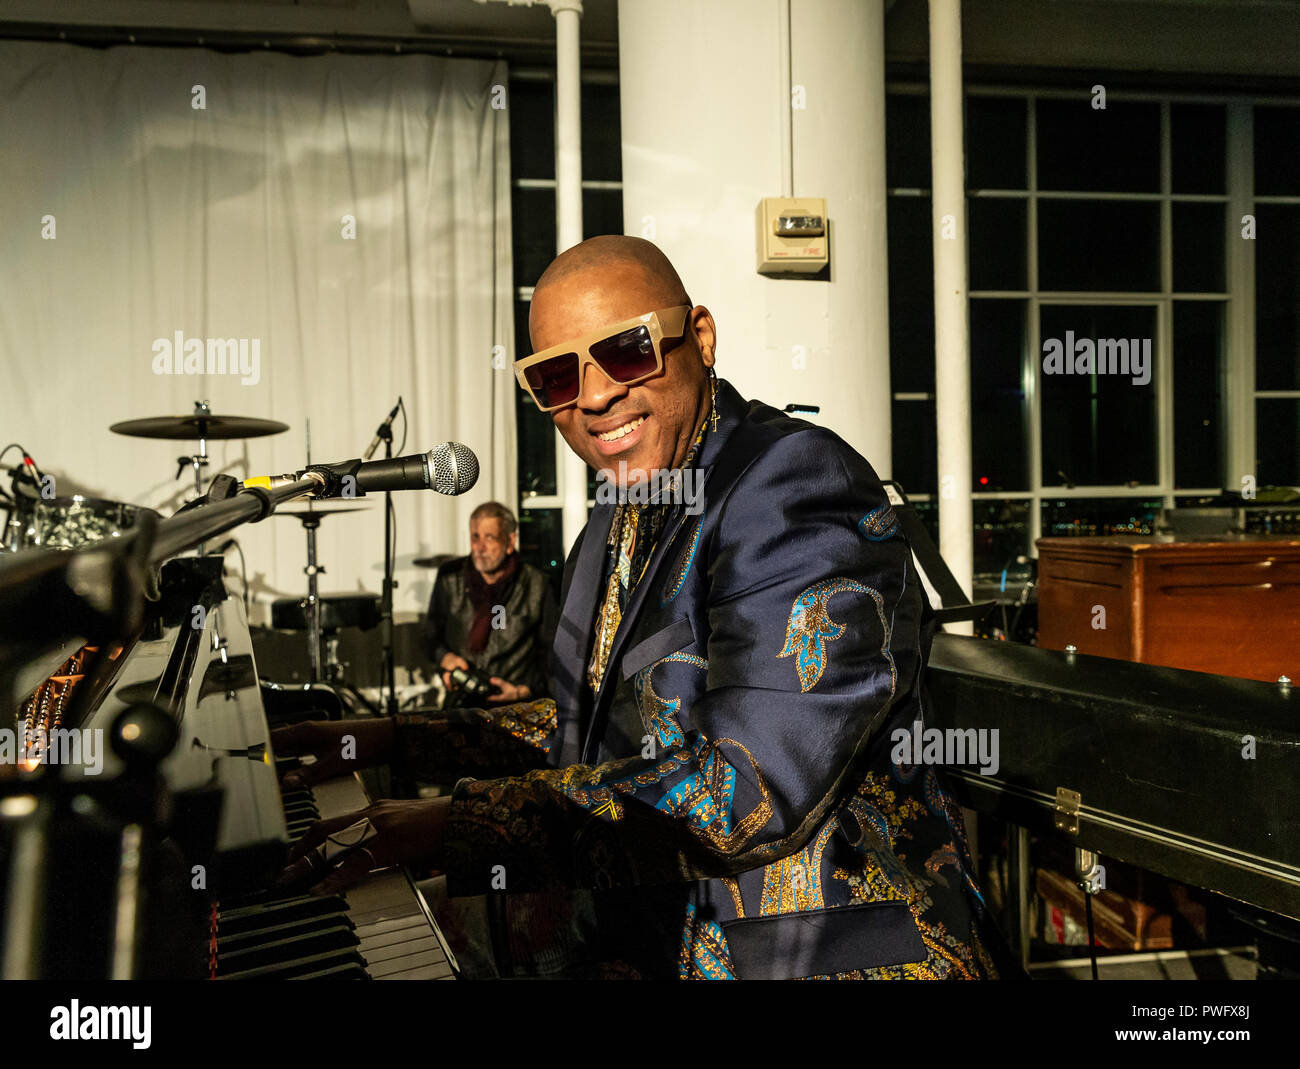 New York, NY - October 13, 2018: Davell Crawford performs at Loft Party A Night for the Soul for Jazz Foundation of America at Hudson Studios, Manhatt Stock Photo